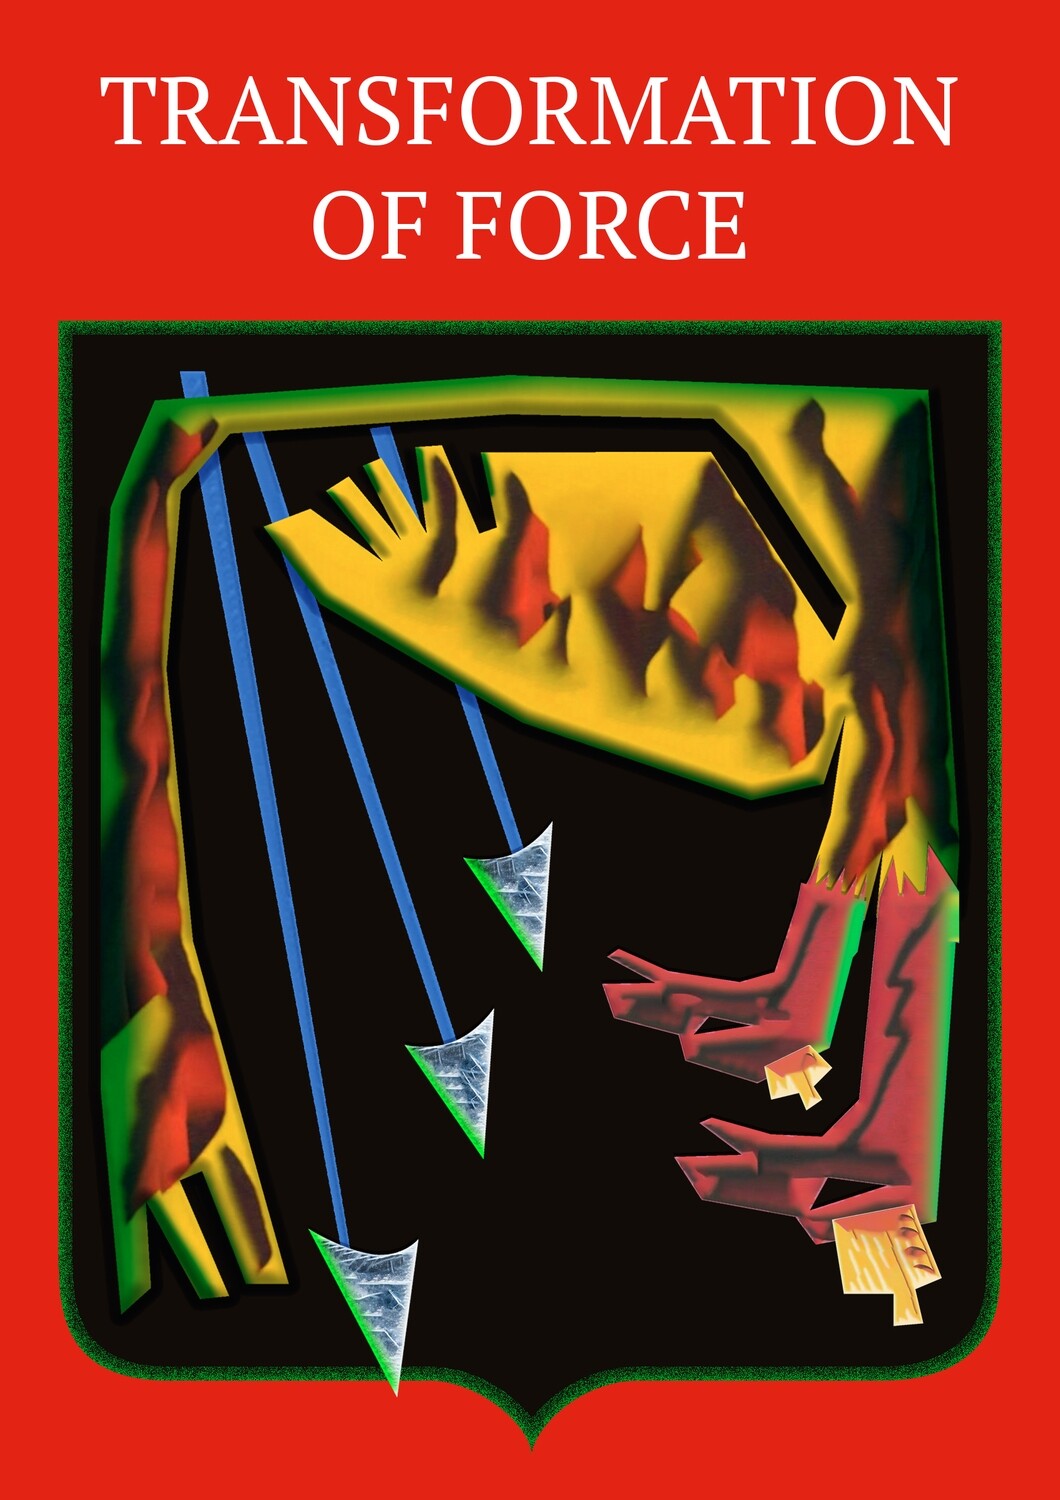 TRANSFORMATION OF FORCE